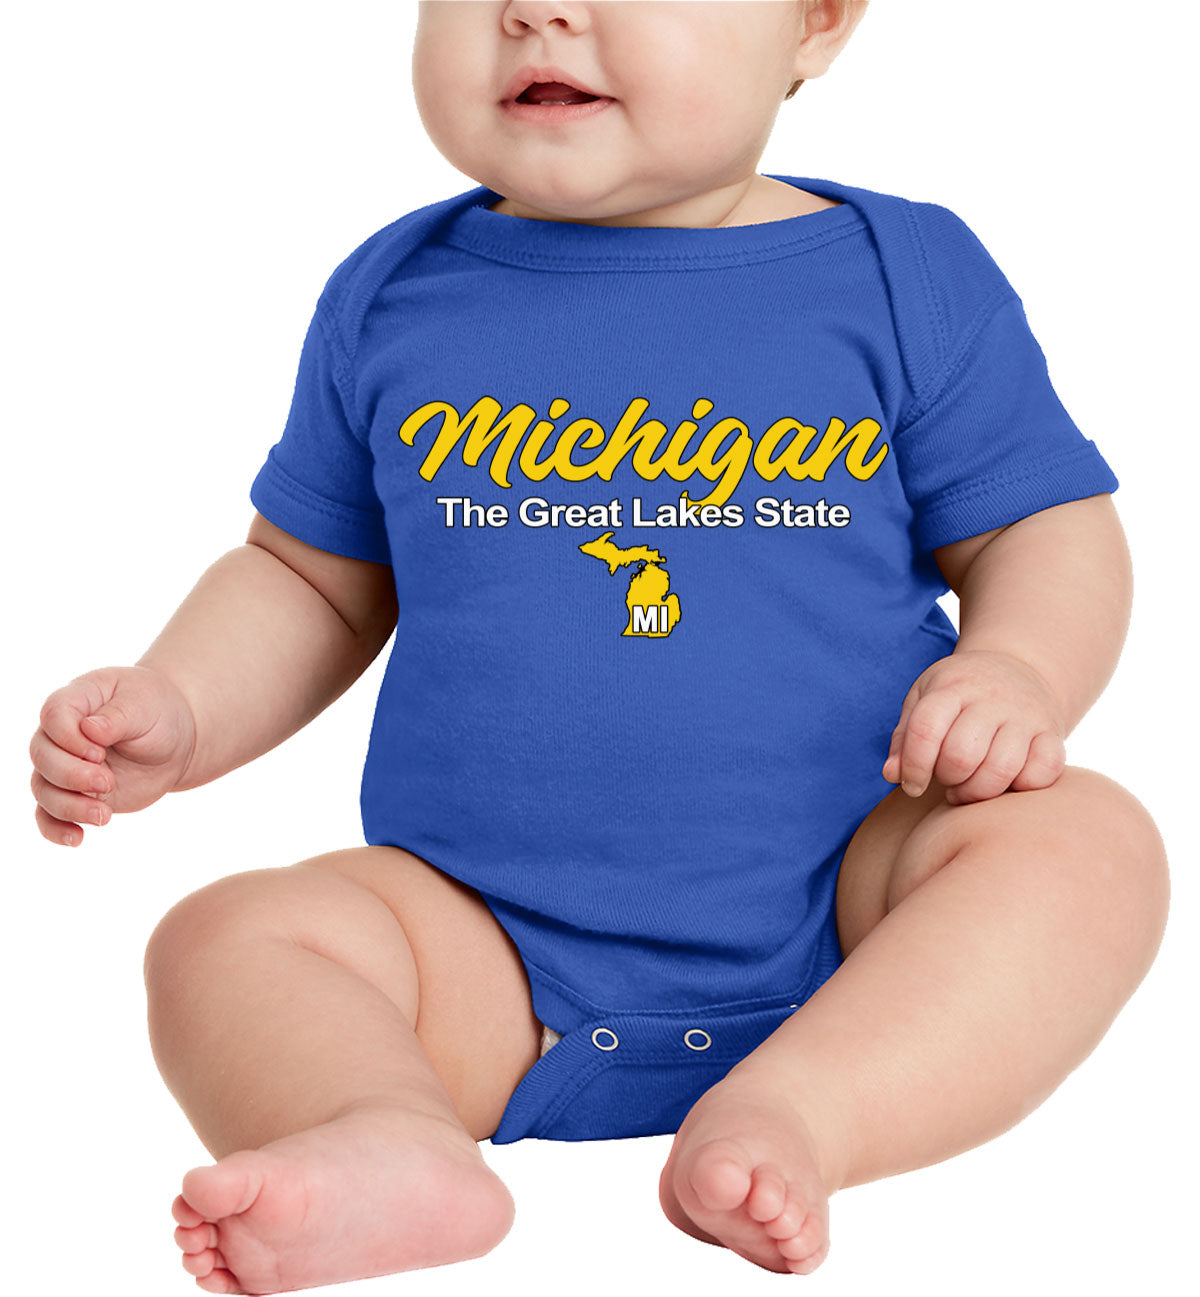 Michigan The Great Lakes State Baby Onesie